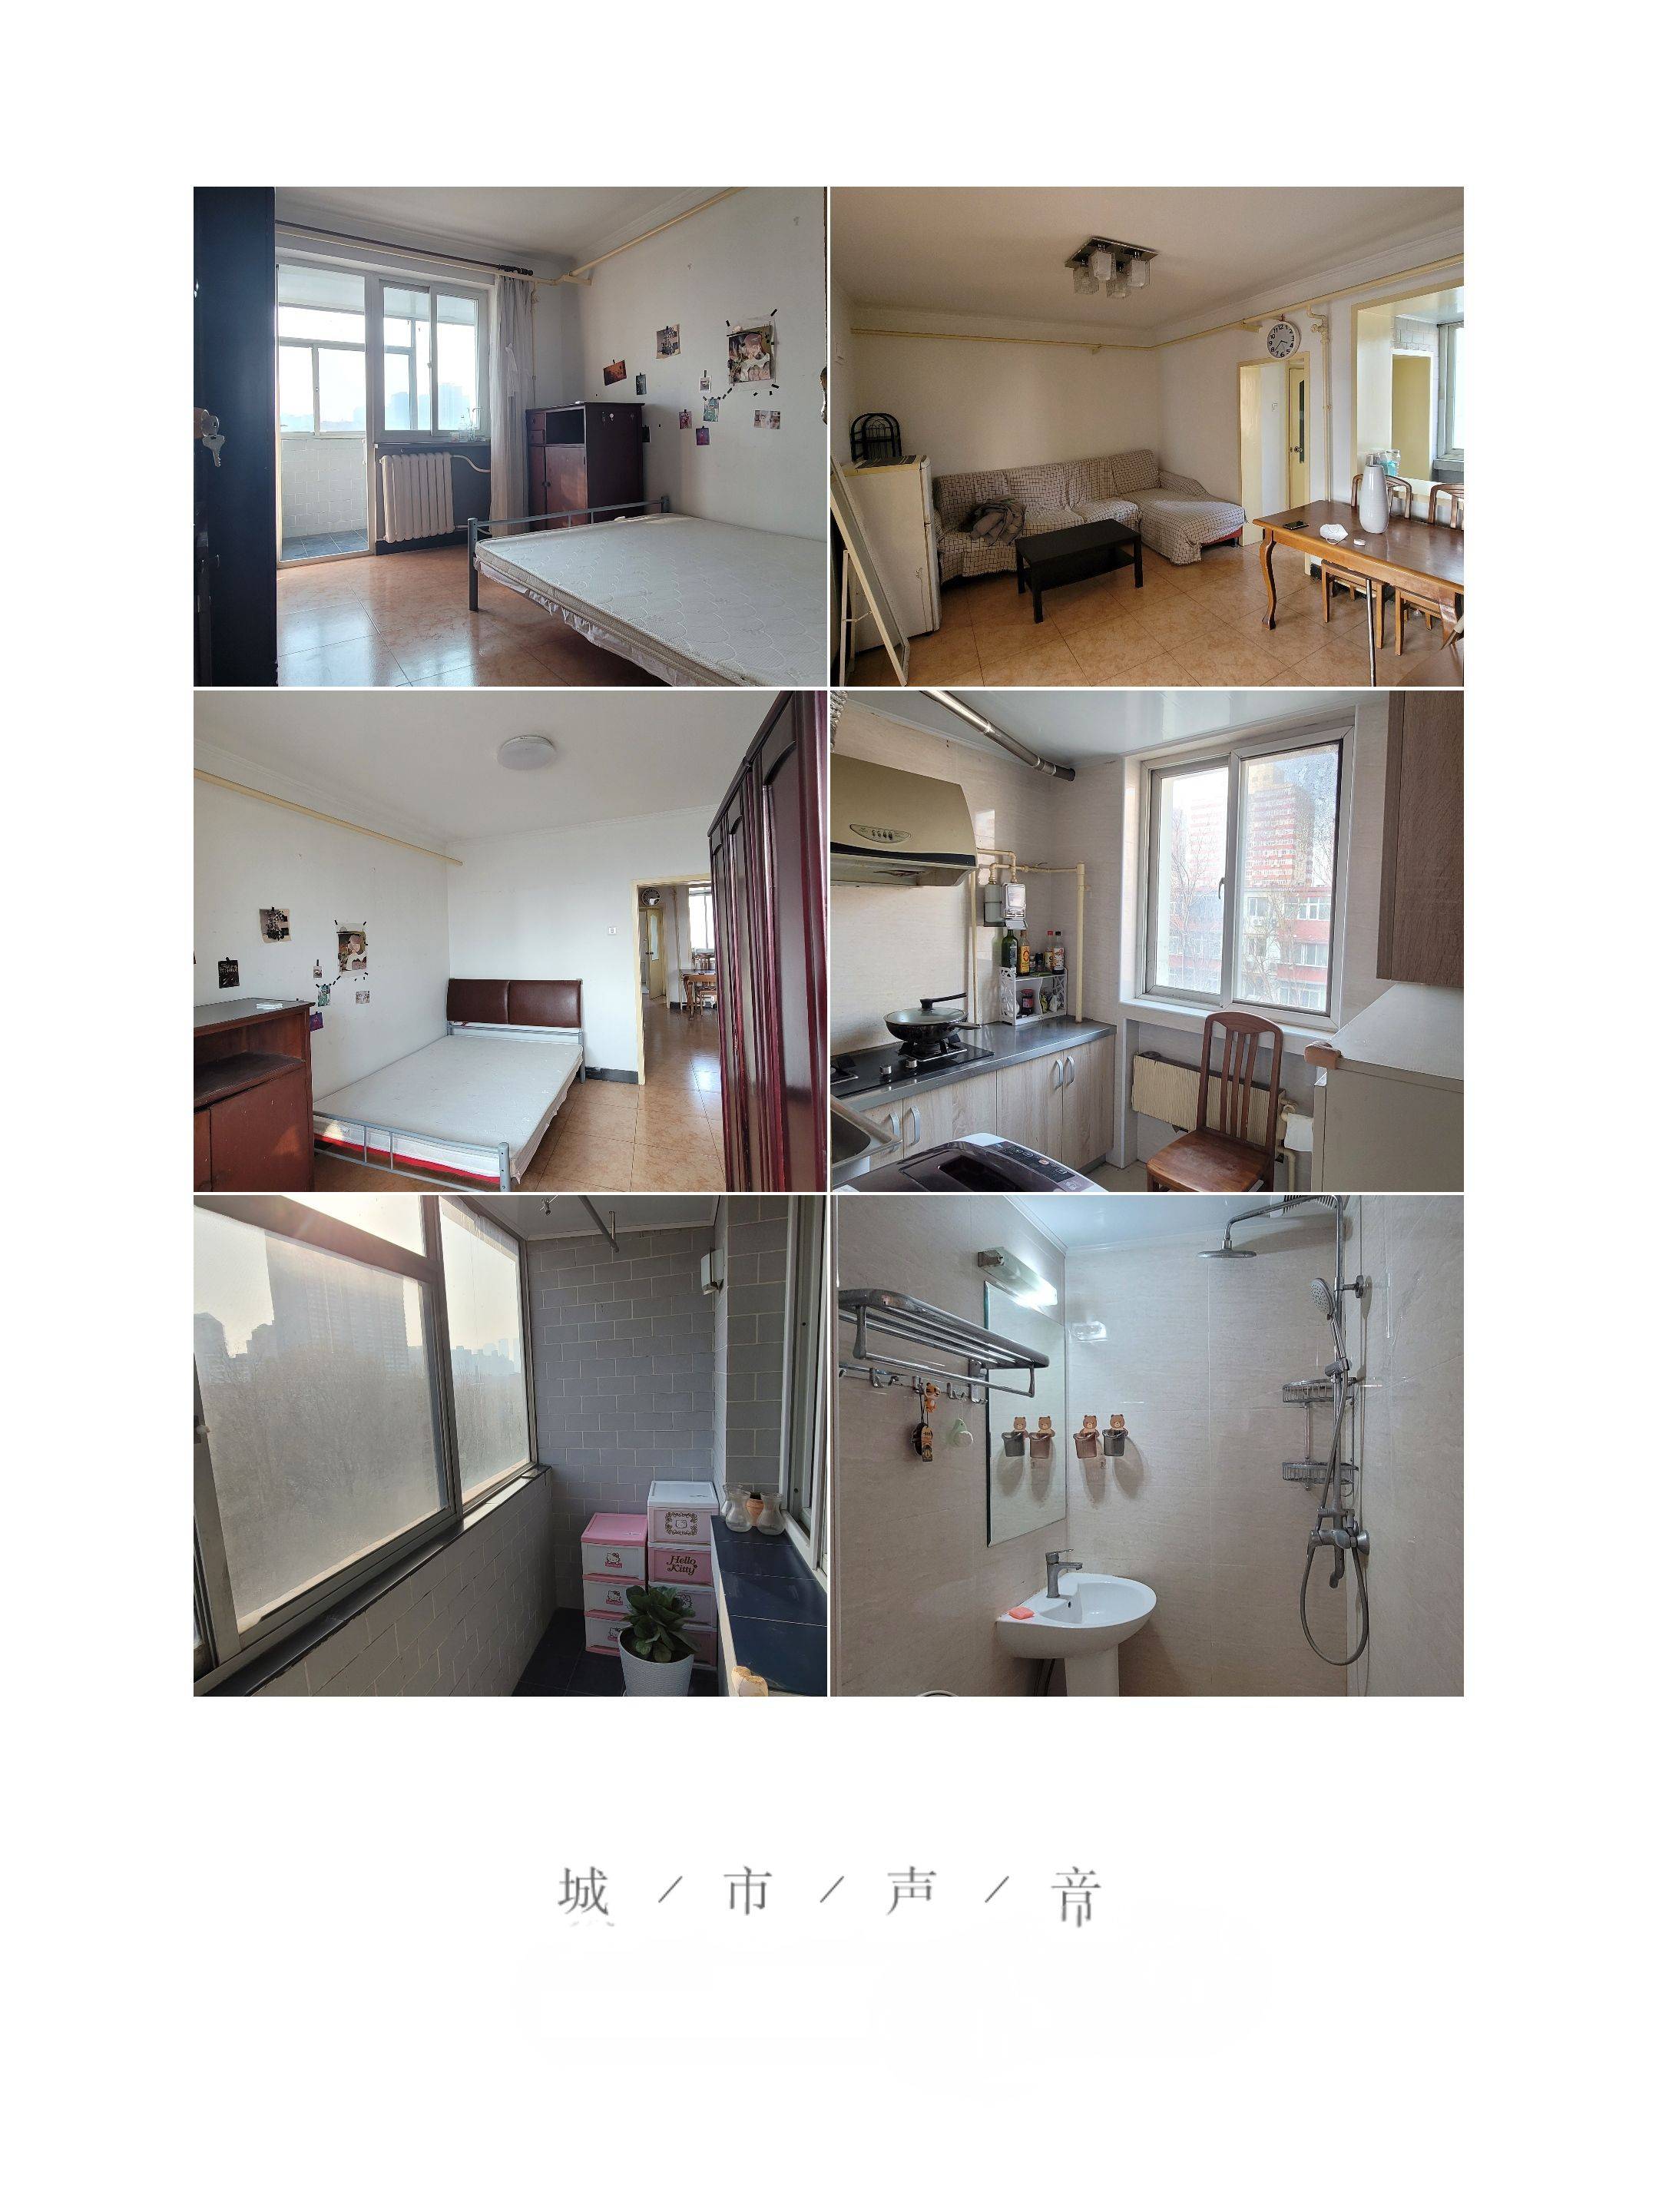 Beijing-Chaoyang-Cozy Home,Clean&Comfy,No Gender Limit,Hustle & Bustle,“Friends”,Chilled,LGBTQ Friendly